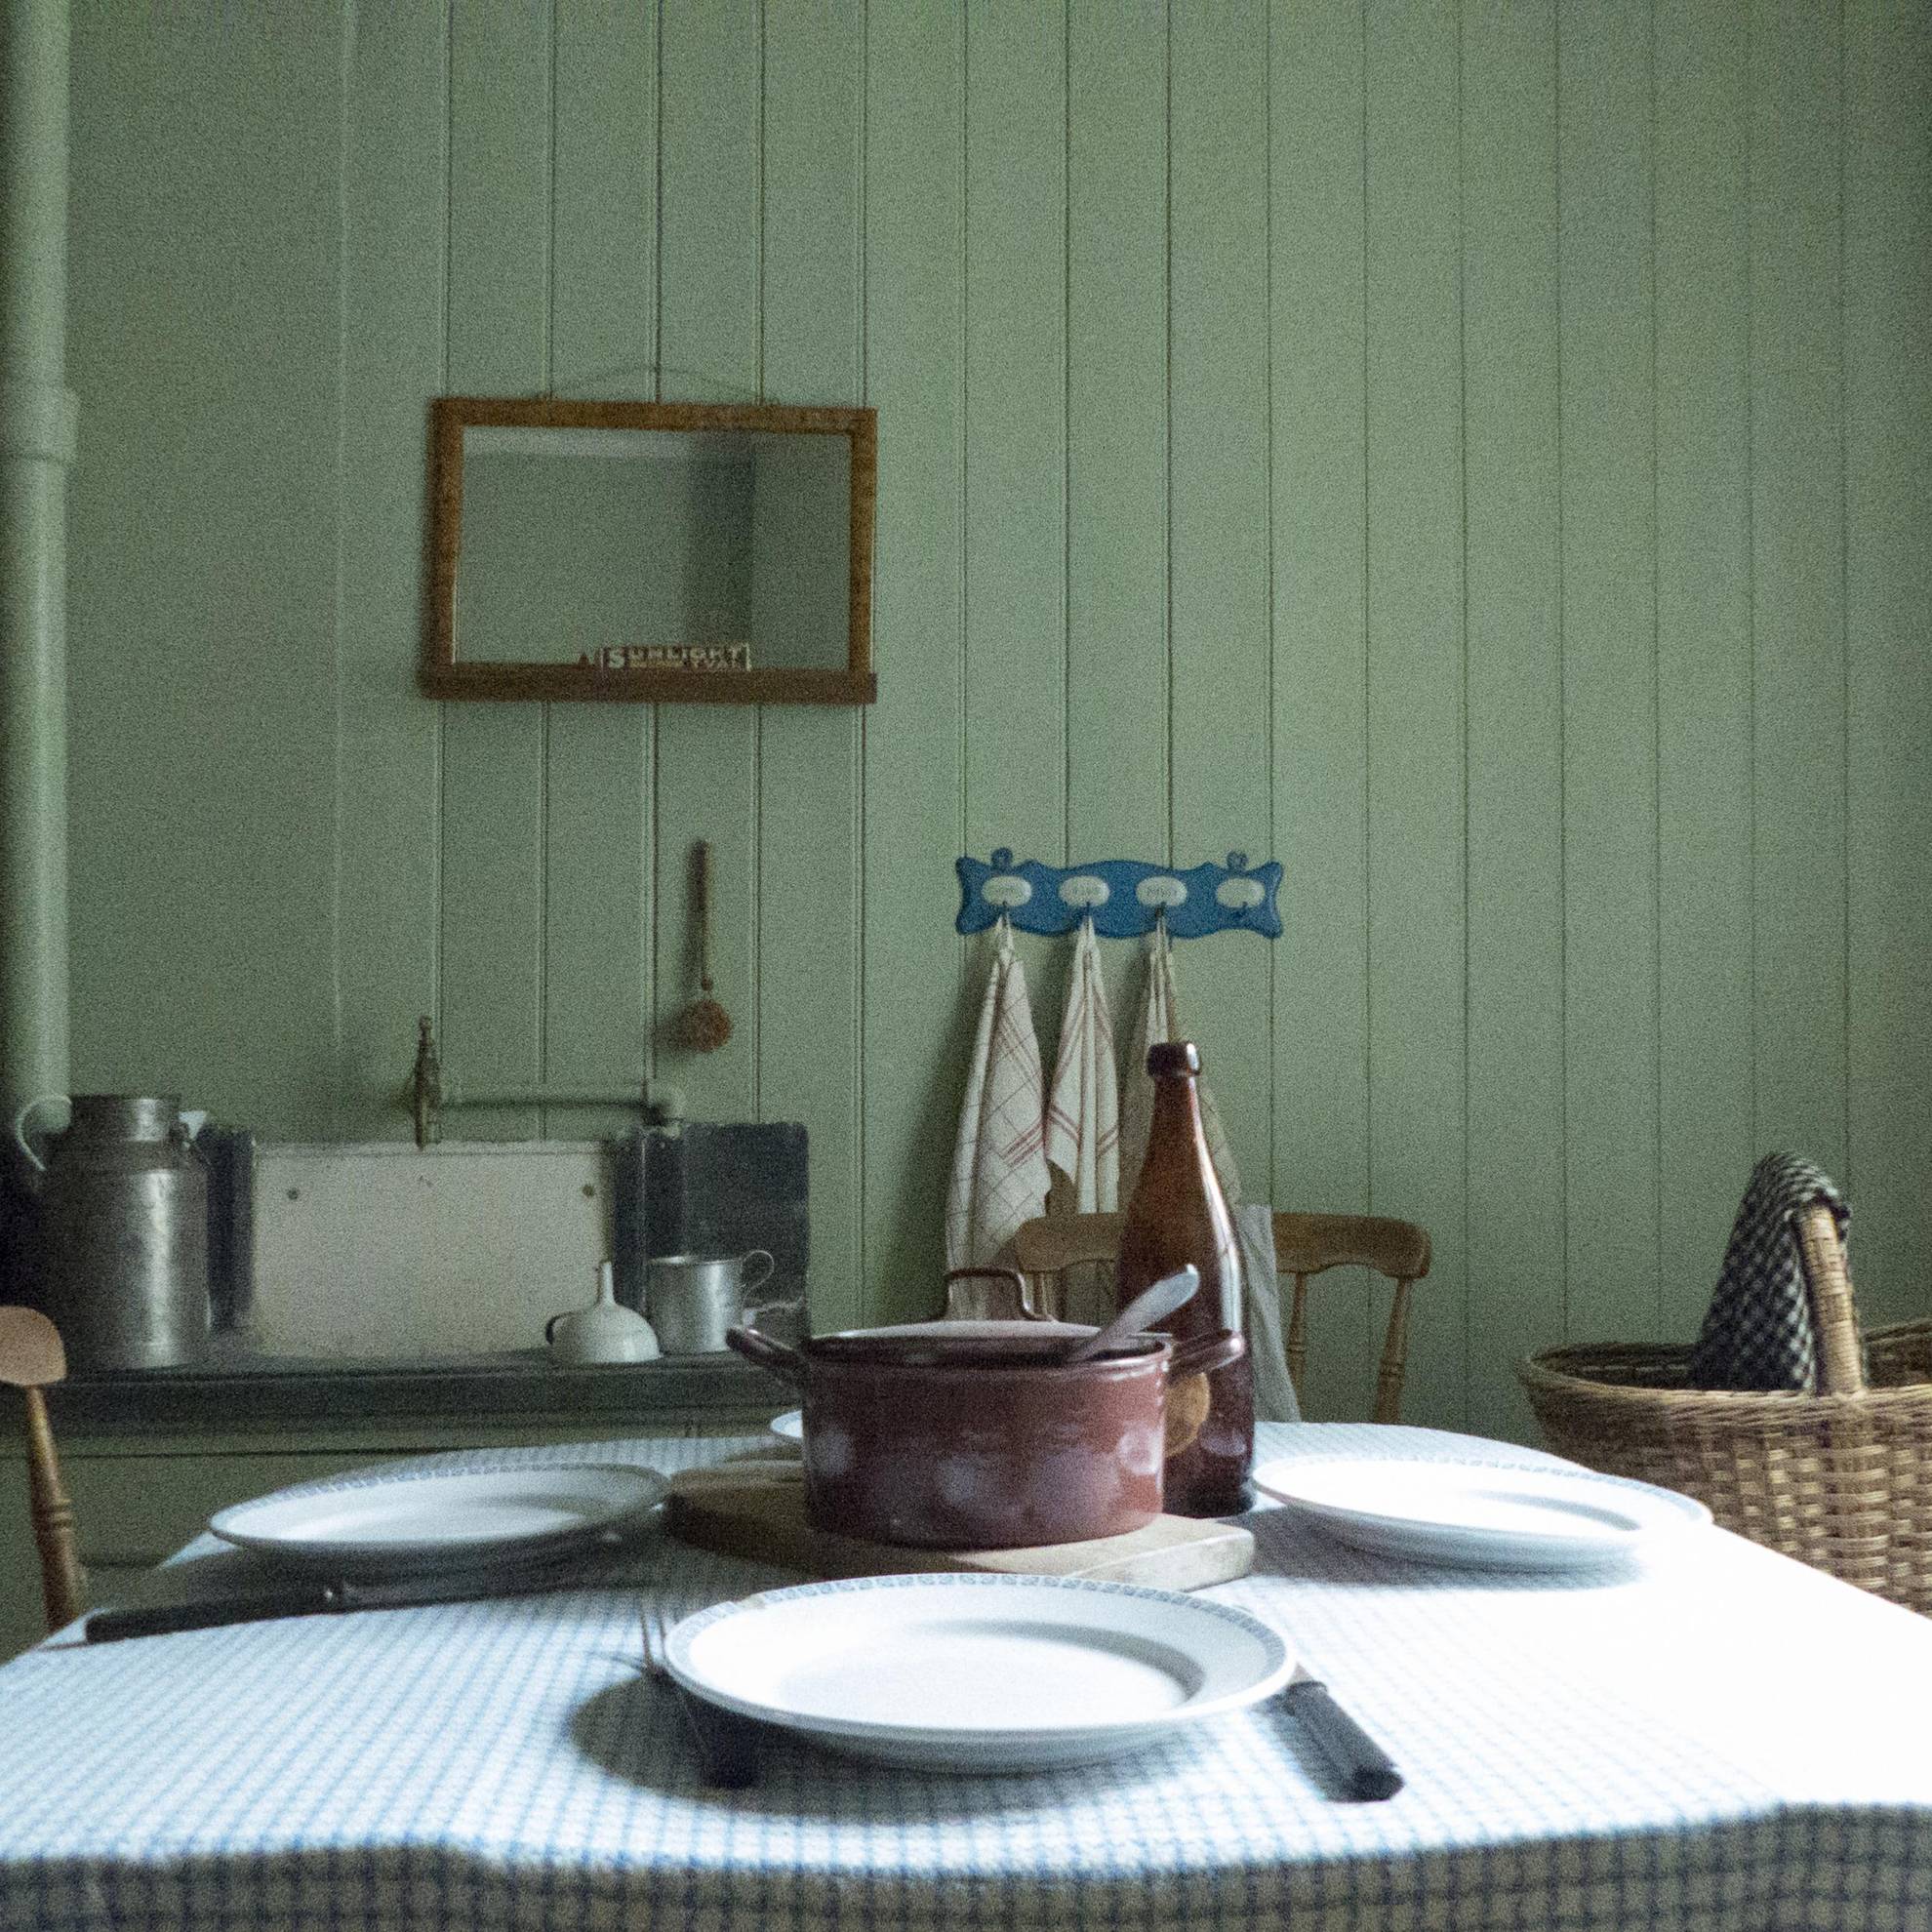 Inside a worker home in the first suburb of Gothenburg during the 19th and 20th centuries. A set table with a iron pot in the middle. On a green wooden wall hang a mirror.